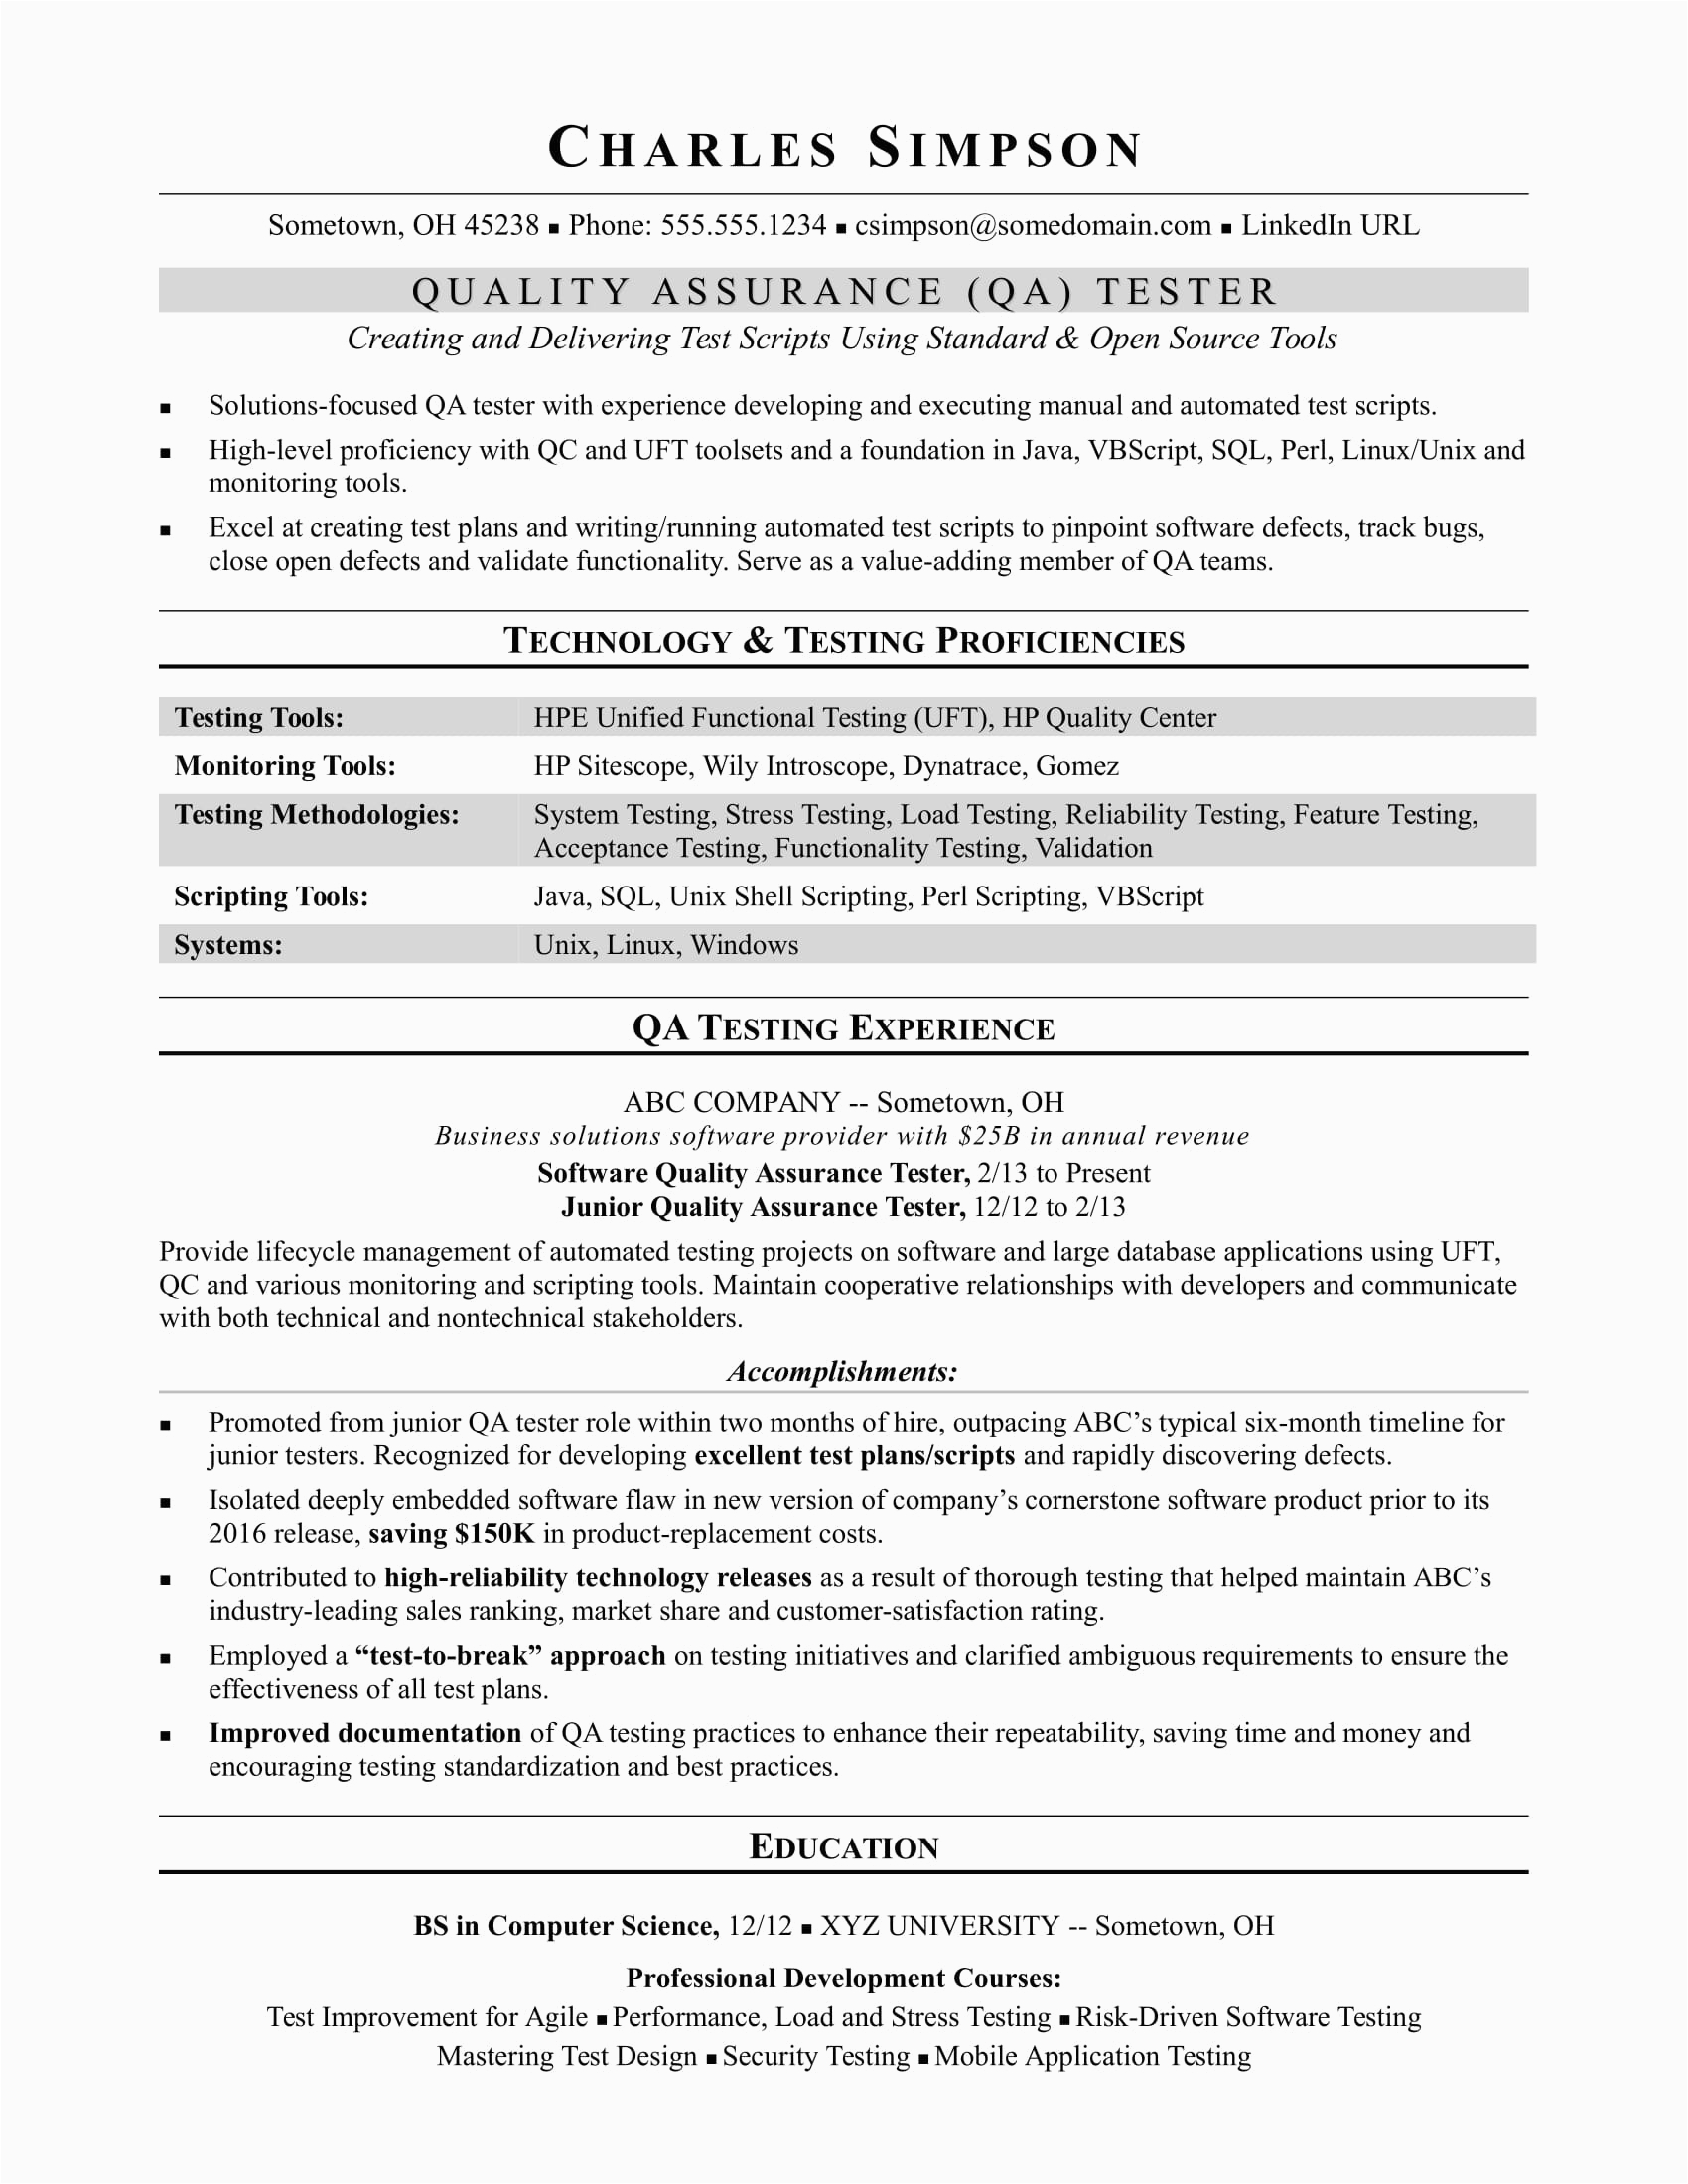 Sample Resumes for Experienced Candidates In Testing Sample Resume for A Midlevel Qa software Tester